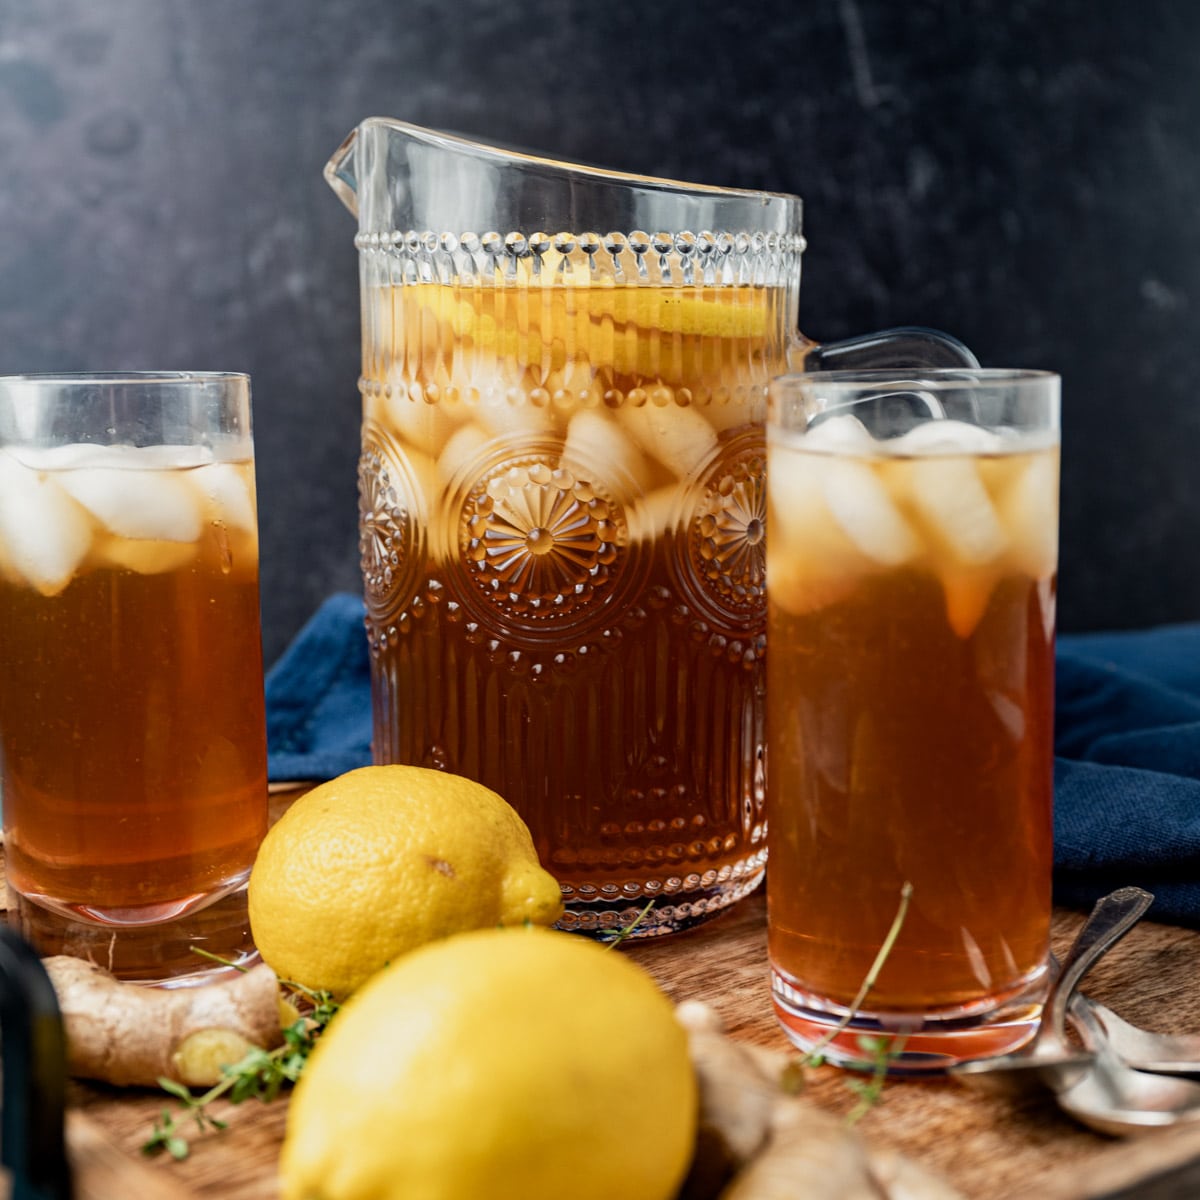 Iced Tea Photos and Images & Pictures